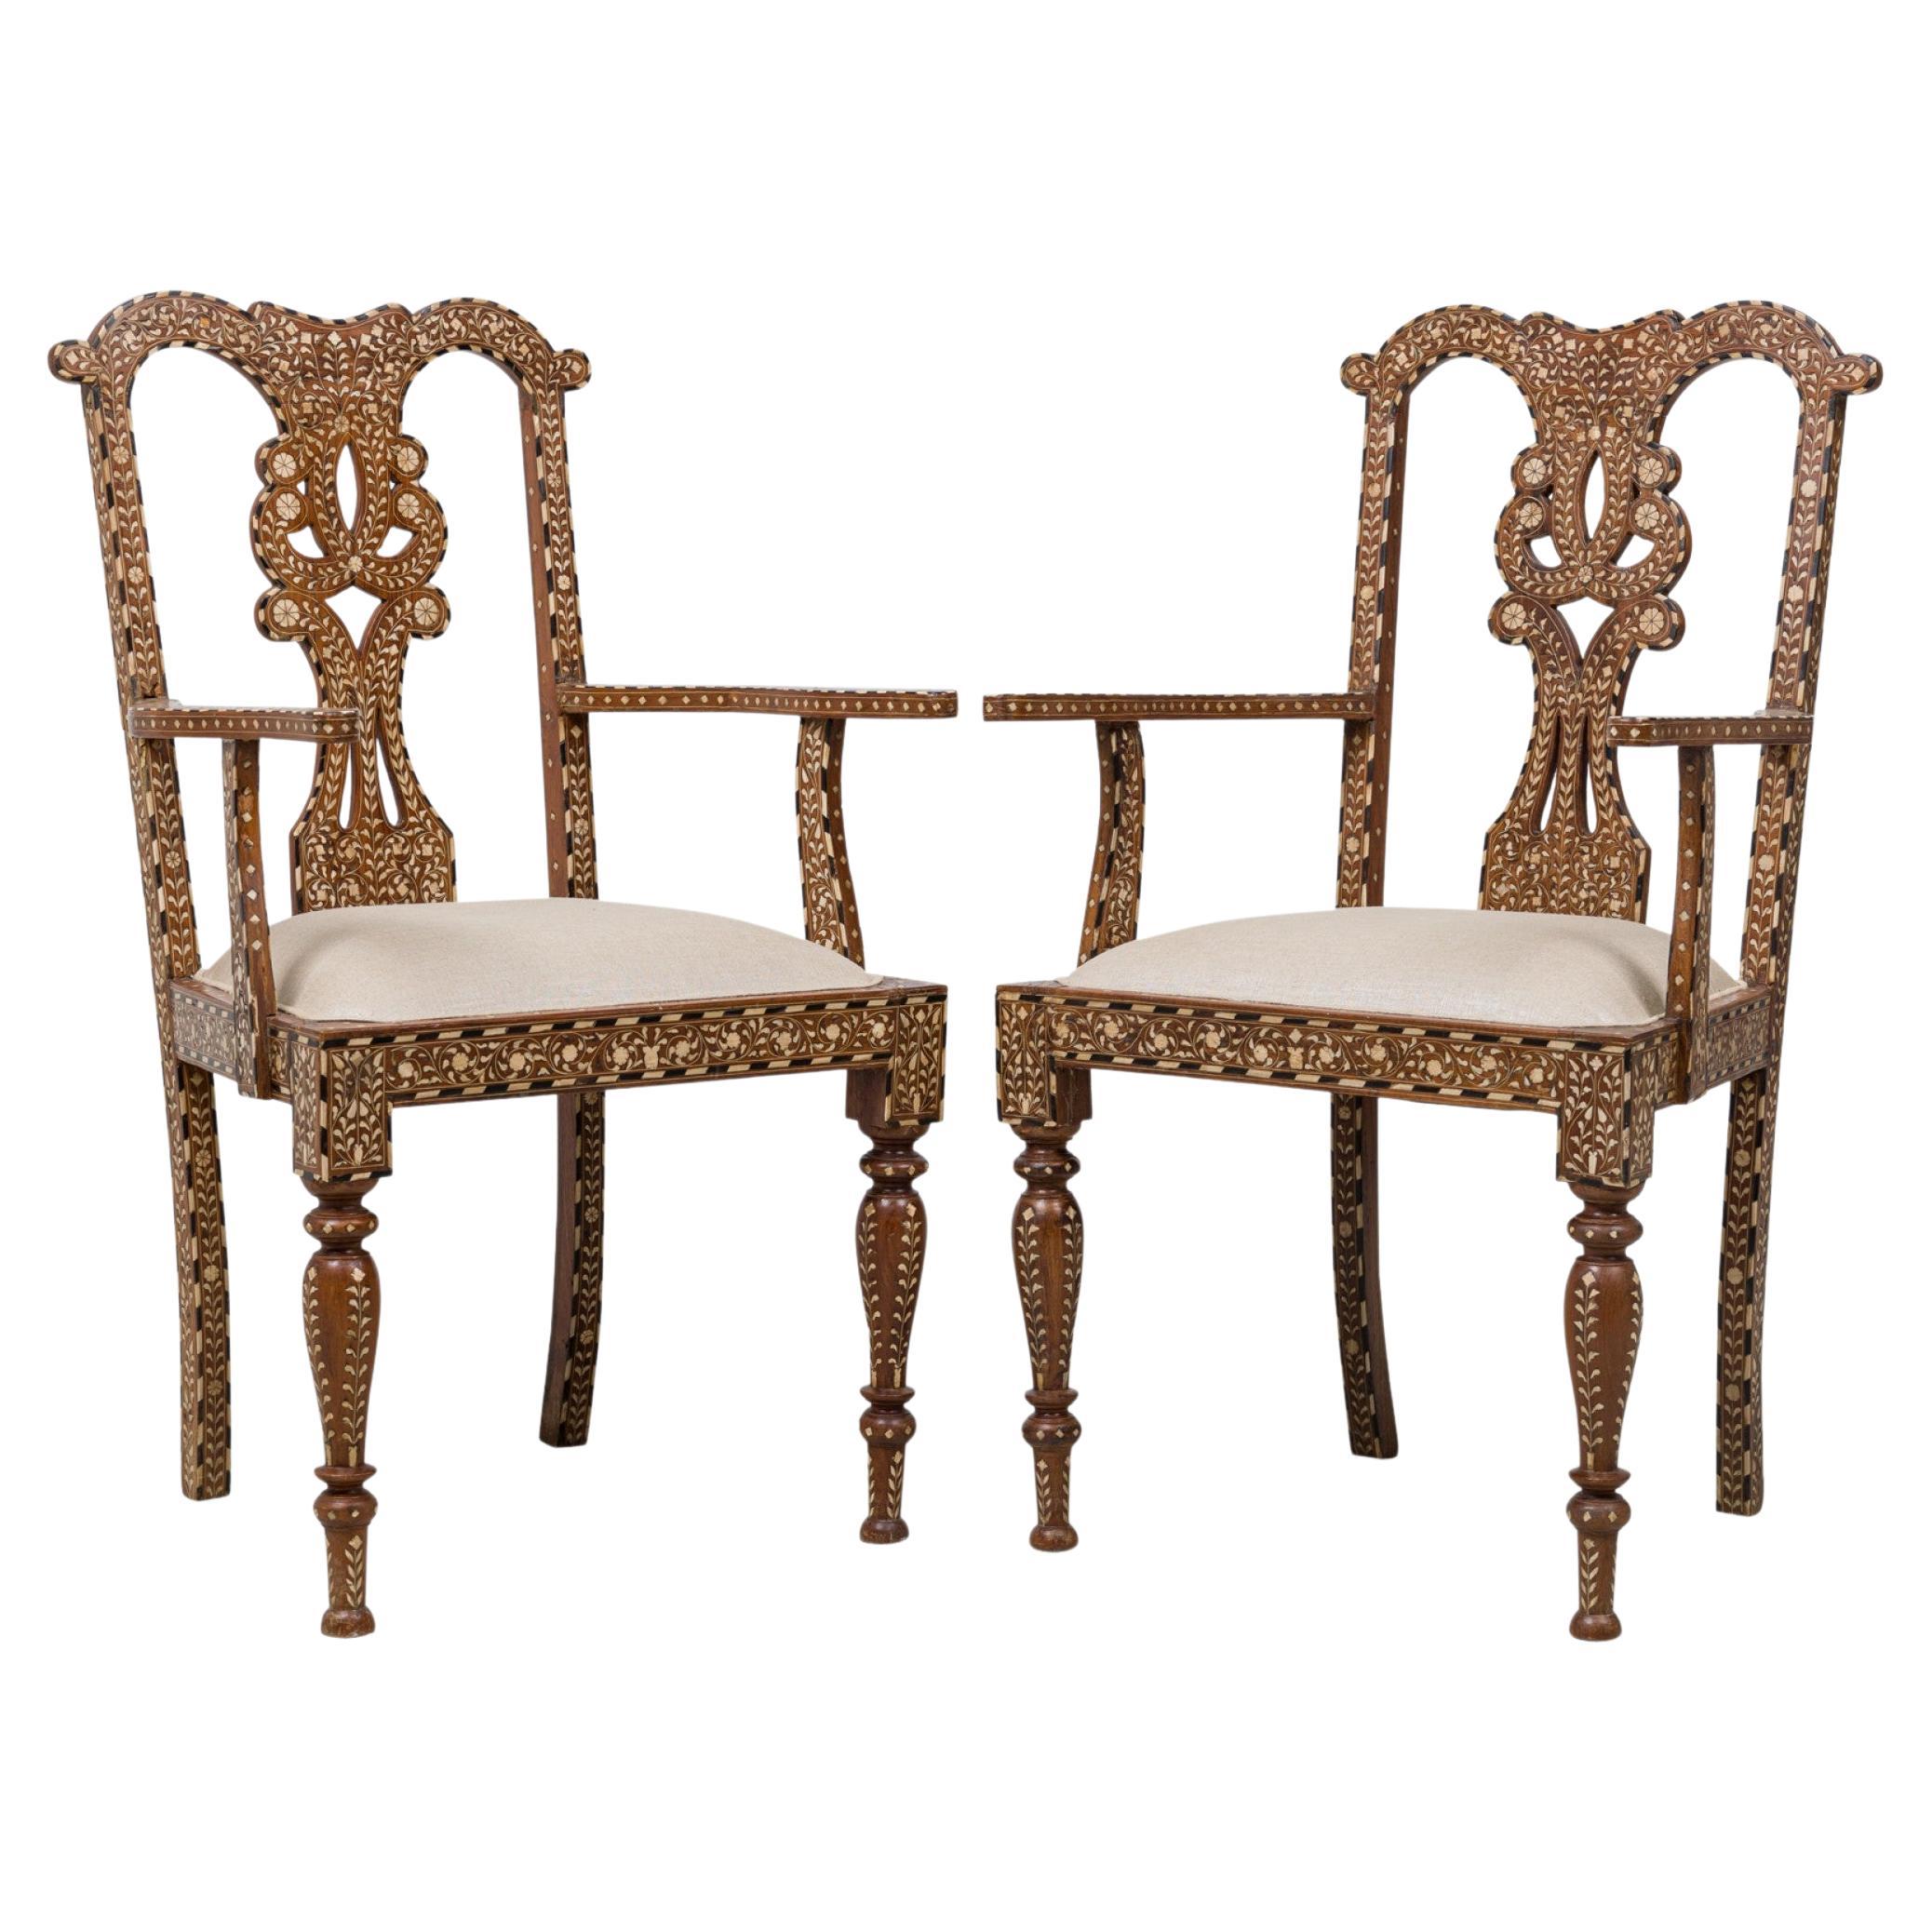 Set of 4 Anglo-Indian Carved Hardwood and Inlaid Armchairs For Sale